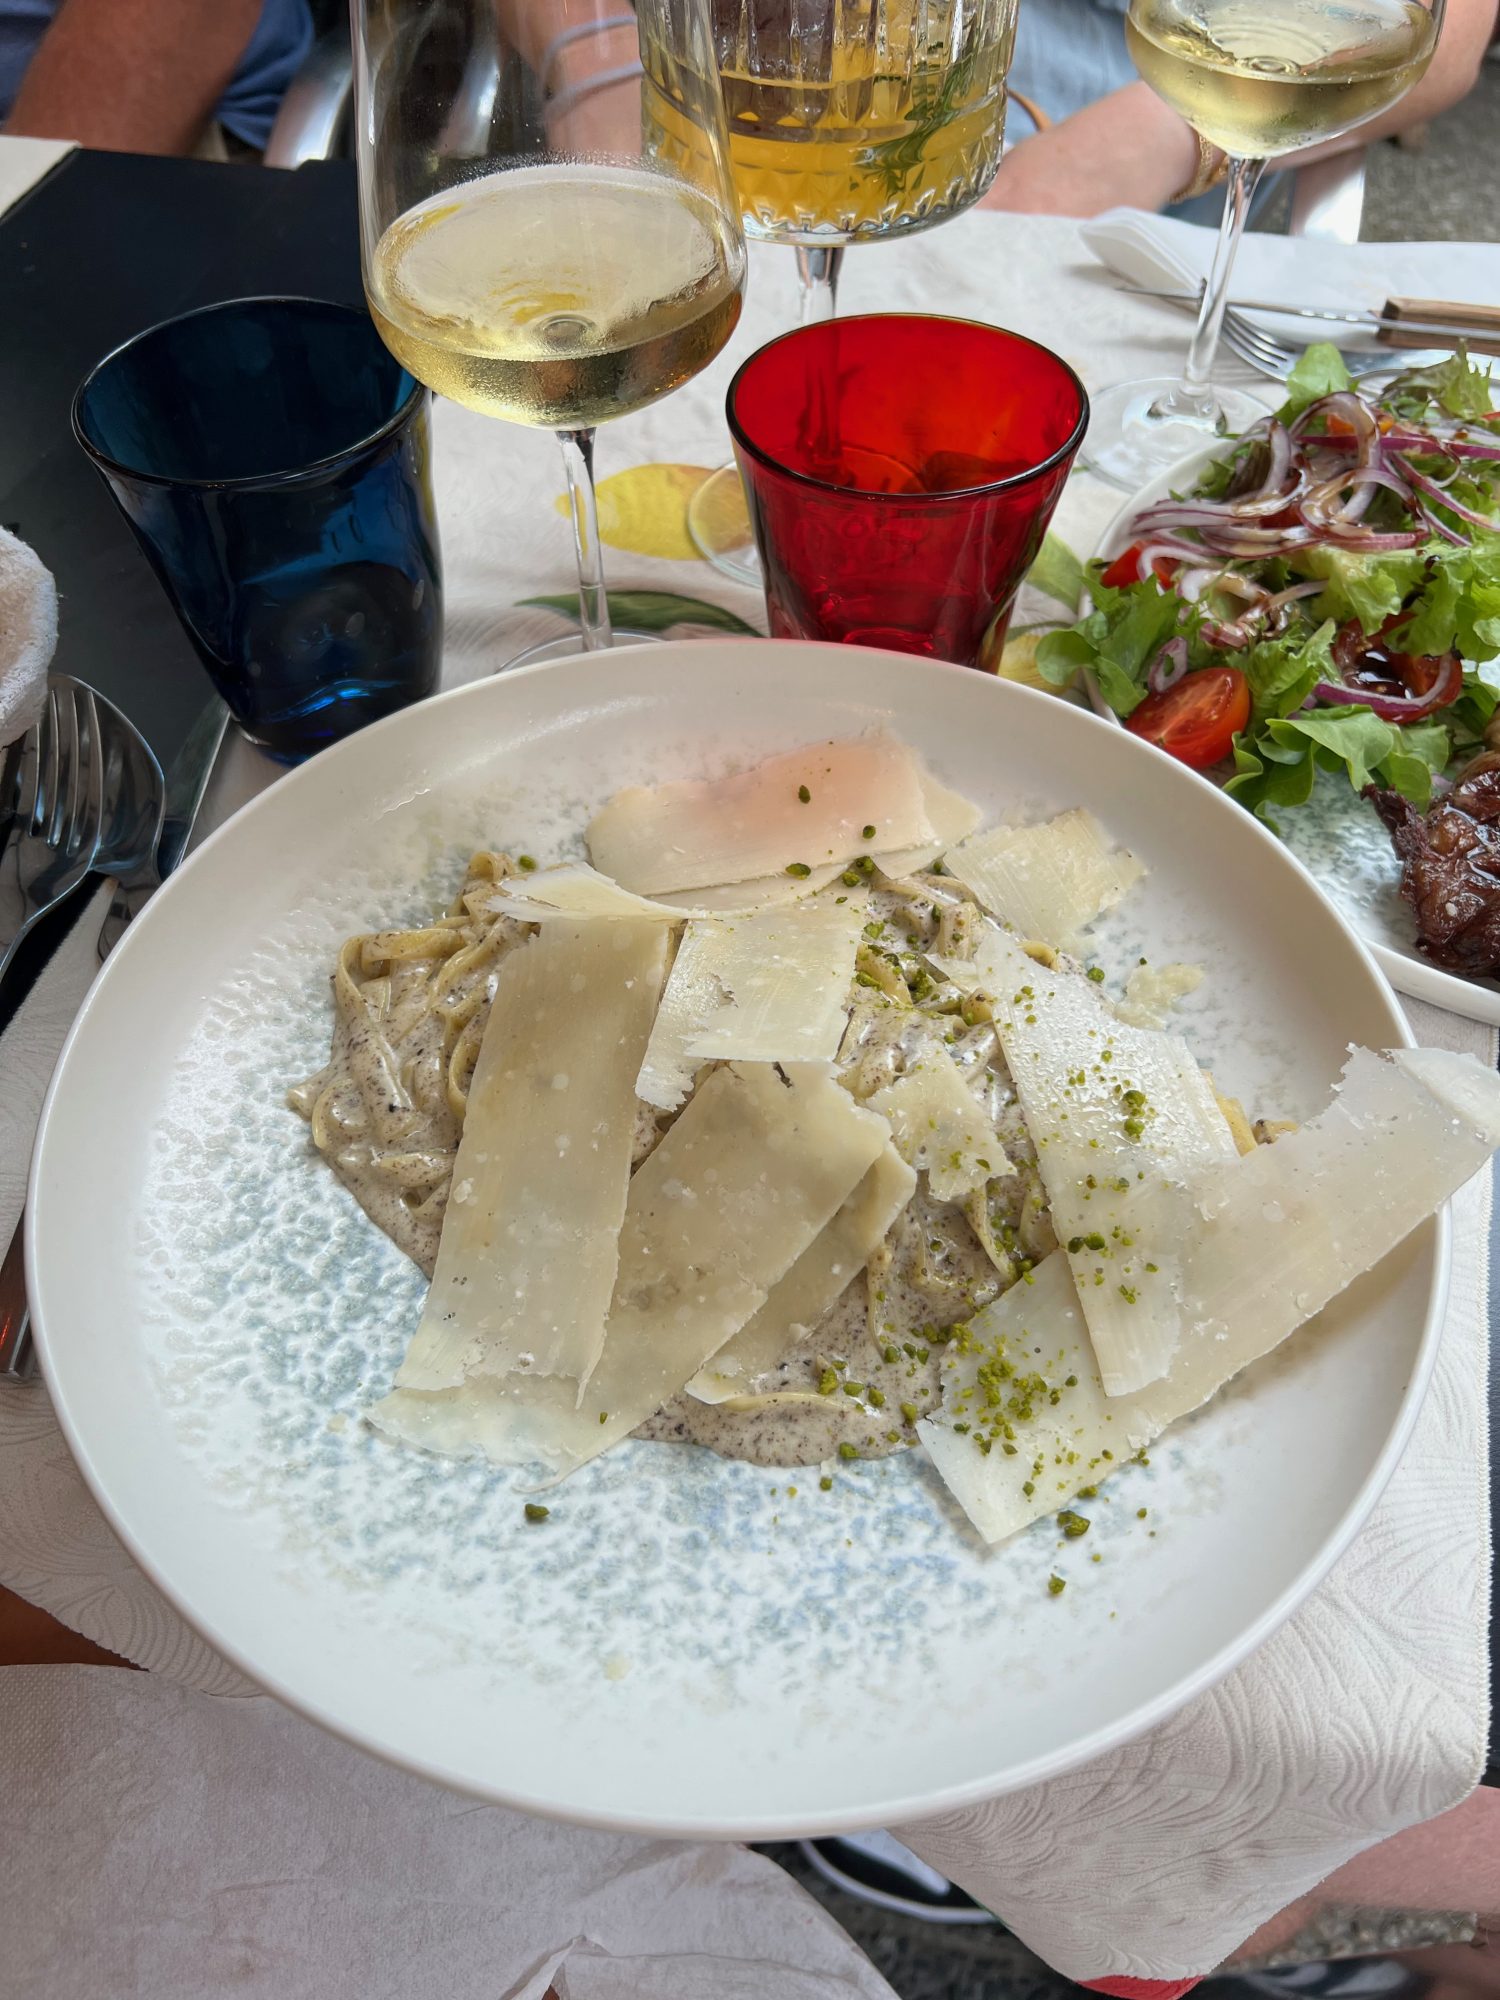 truffle pasta with white wine on white table cloth.